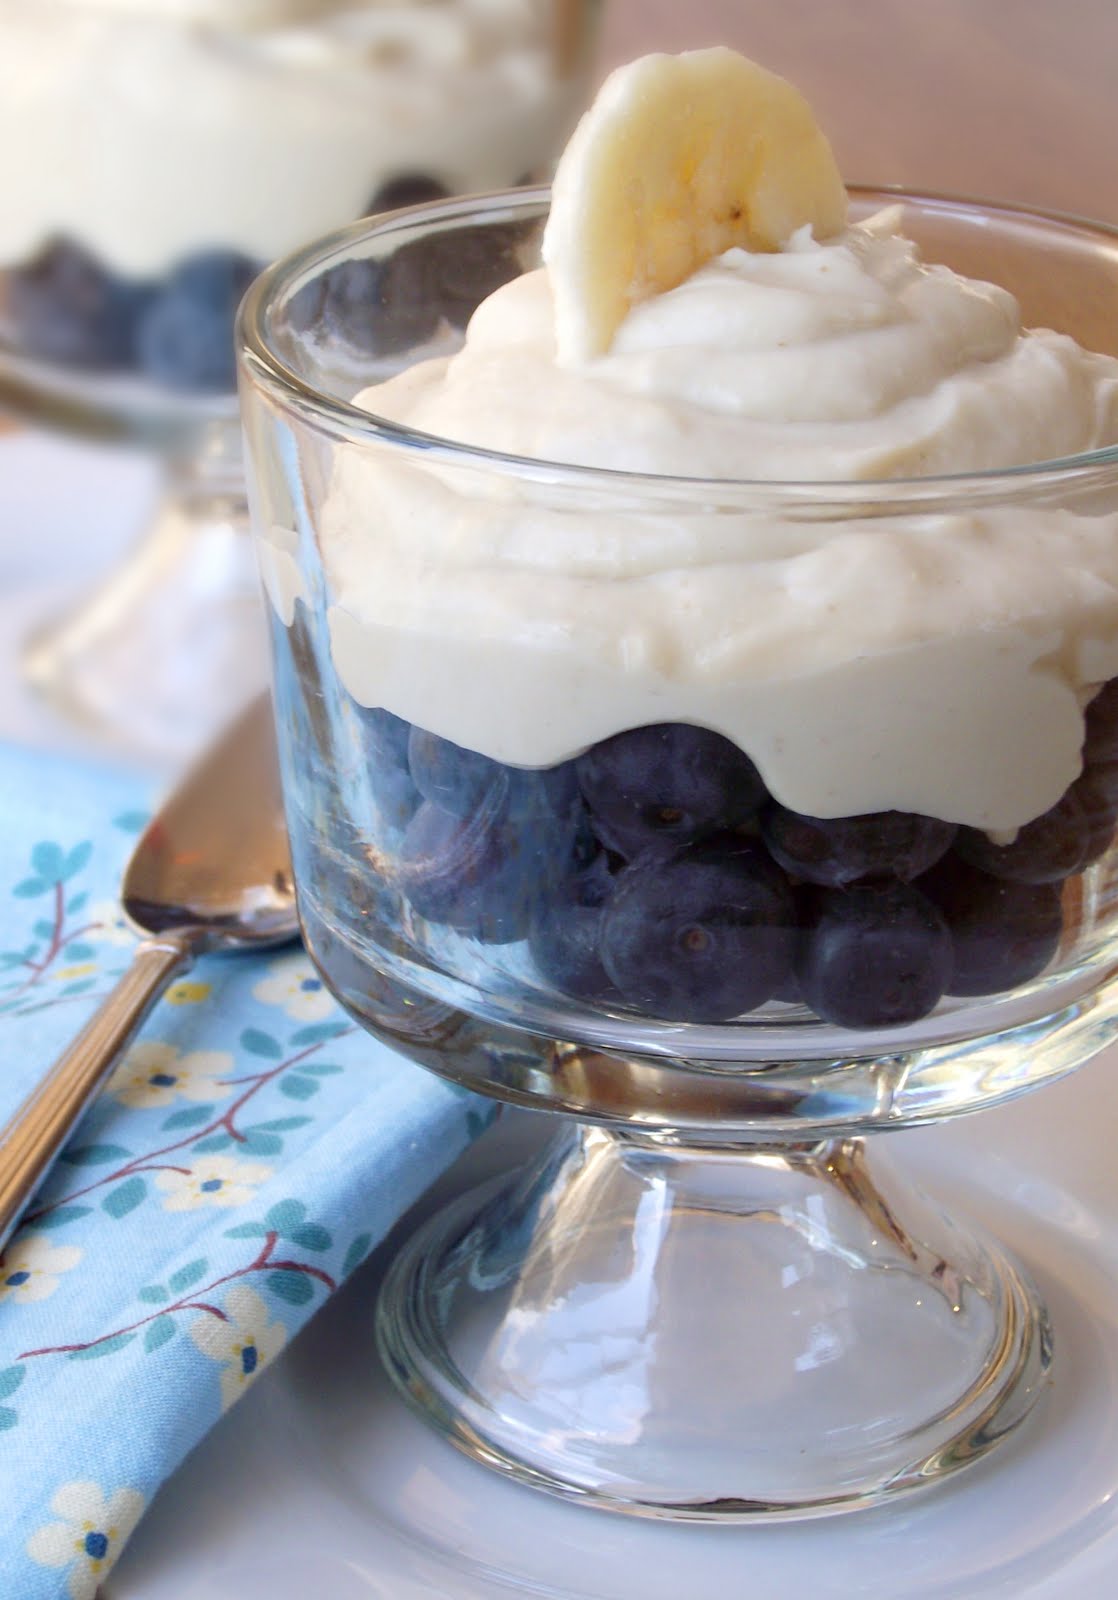 Desserts Without Compromise, by Ricki Heller, gluten-free, dairy-free, sugar-free, egg-free ...